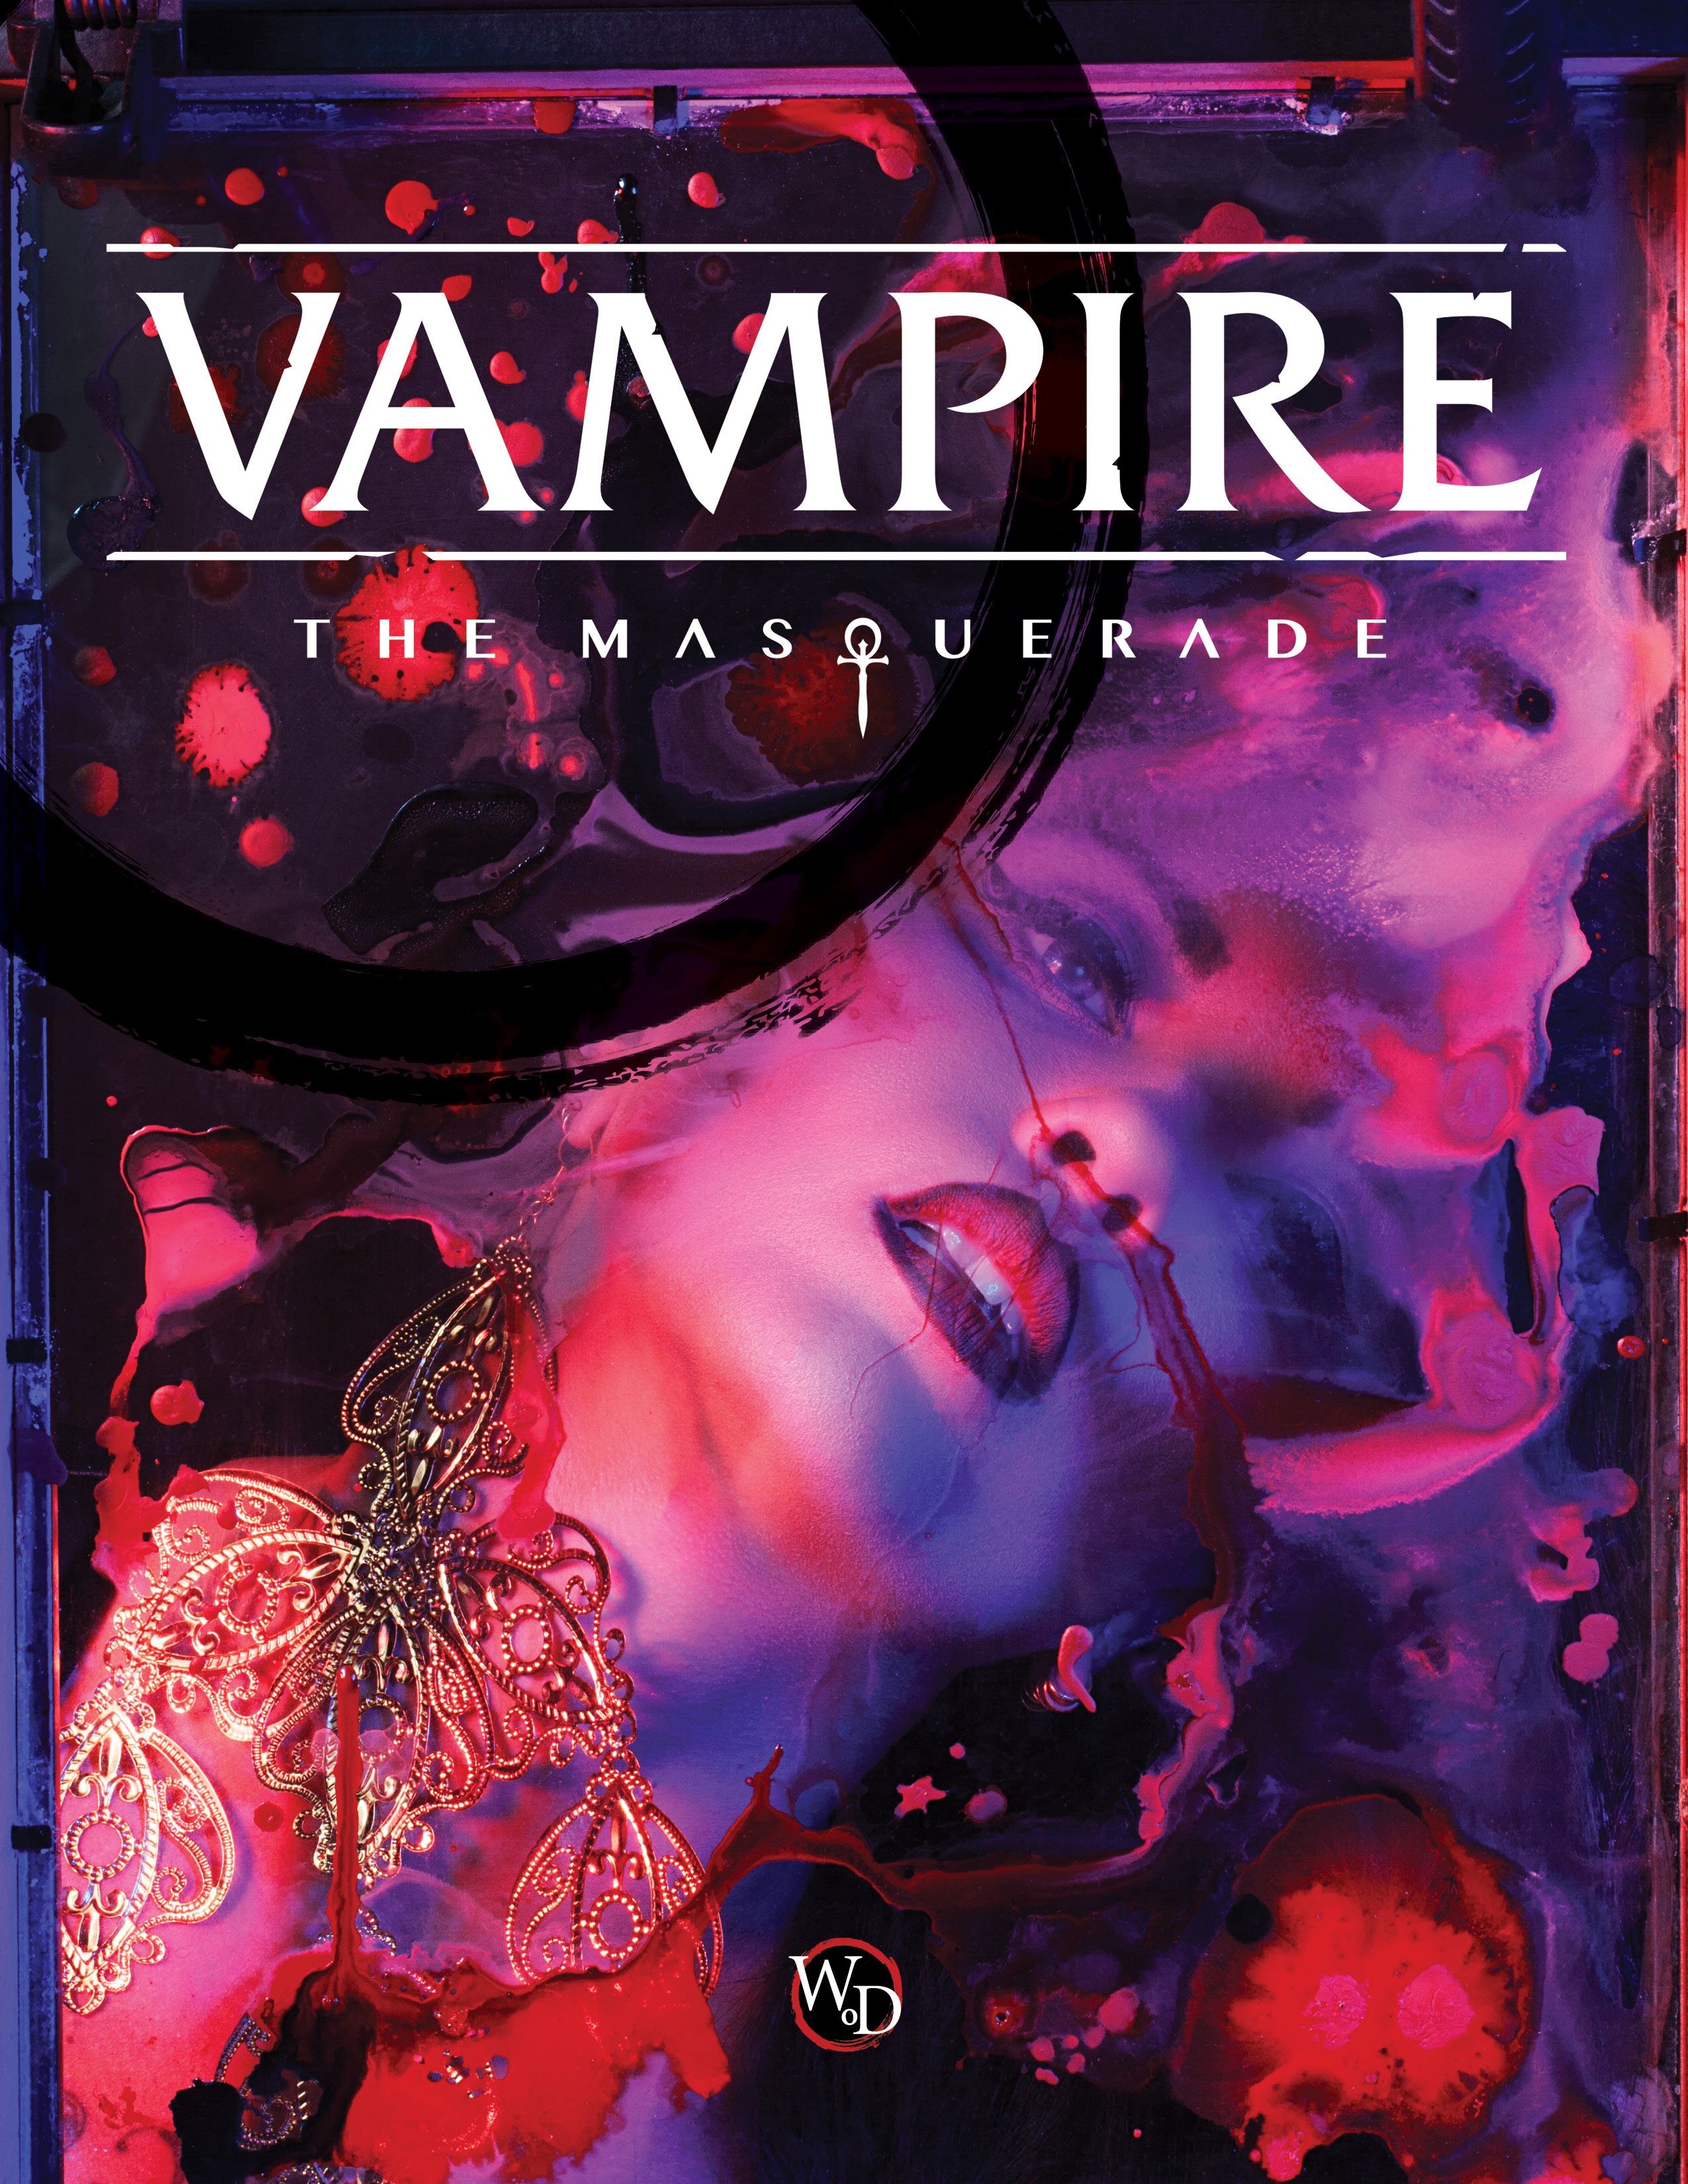 Vampire The Masquerade finally returns to the tabletop with big changes